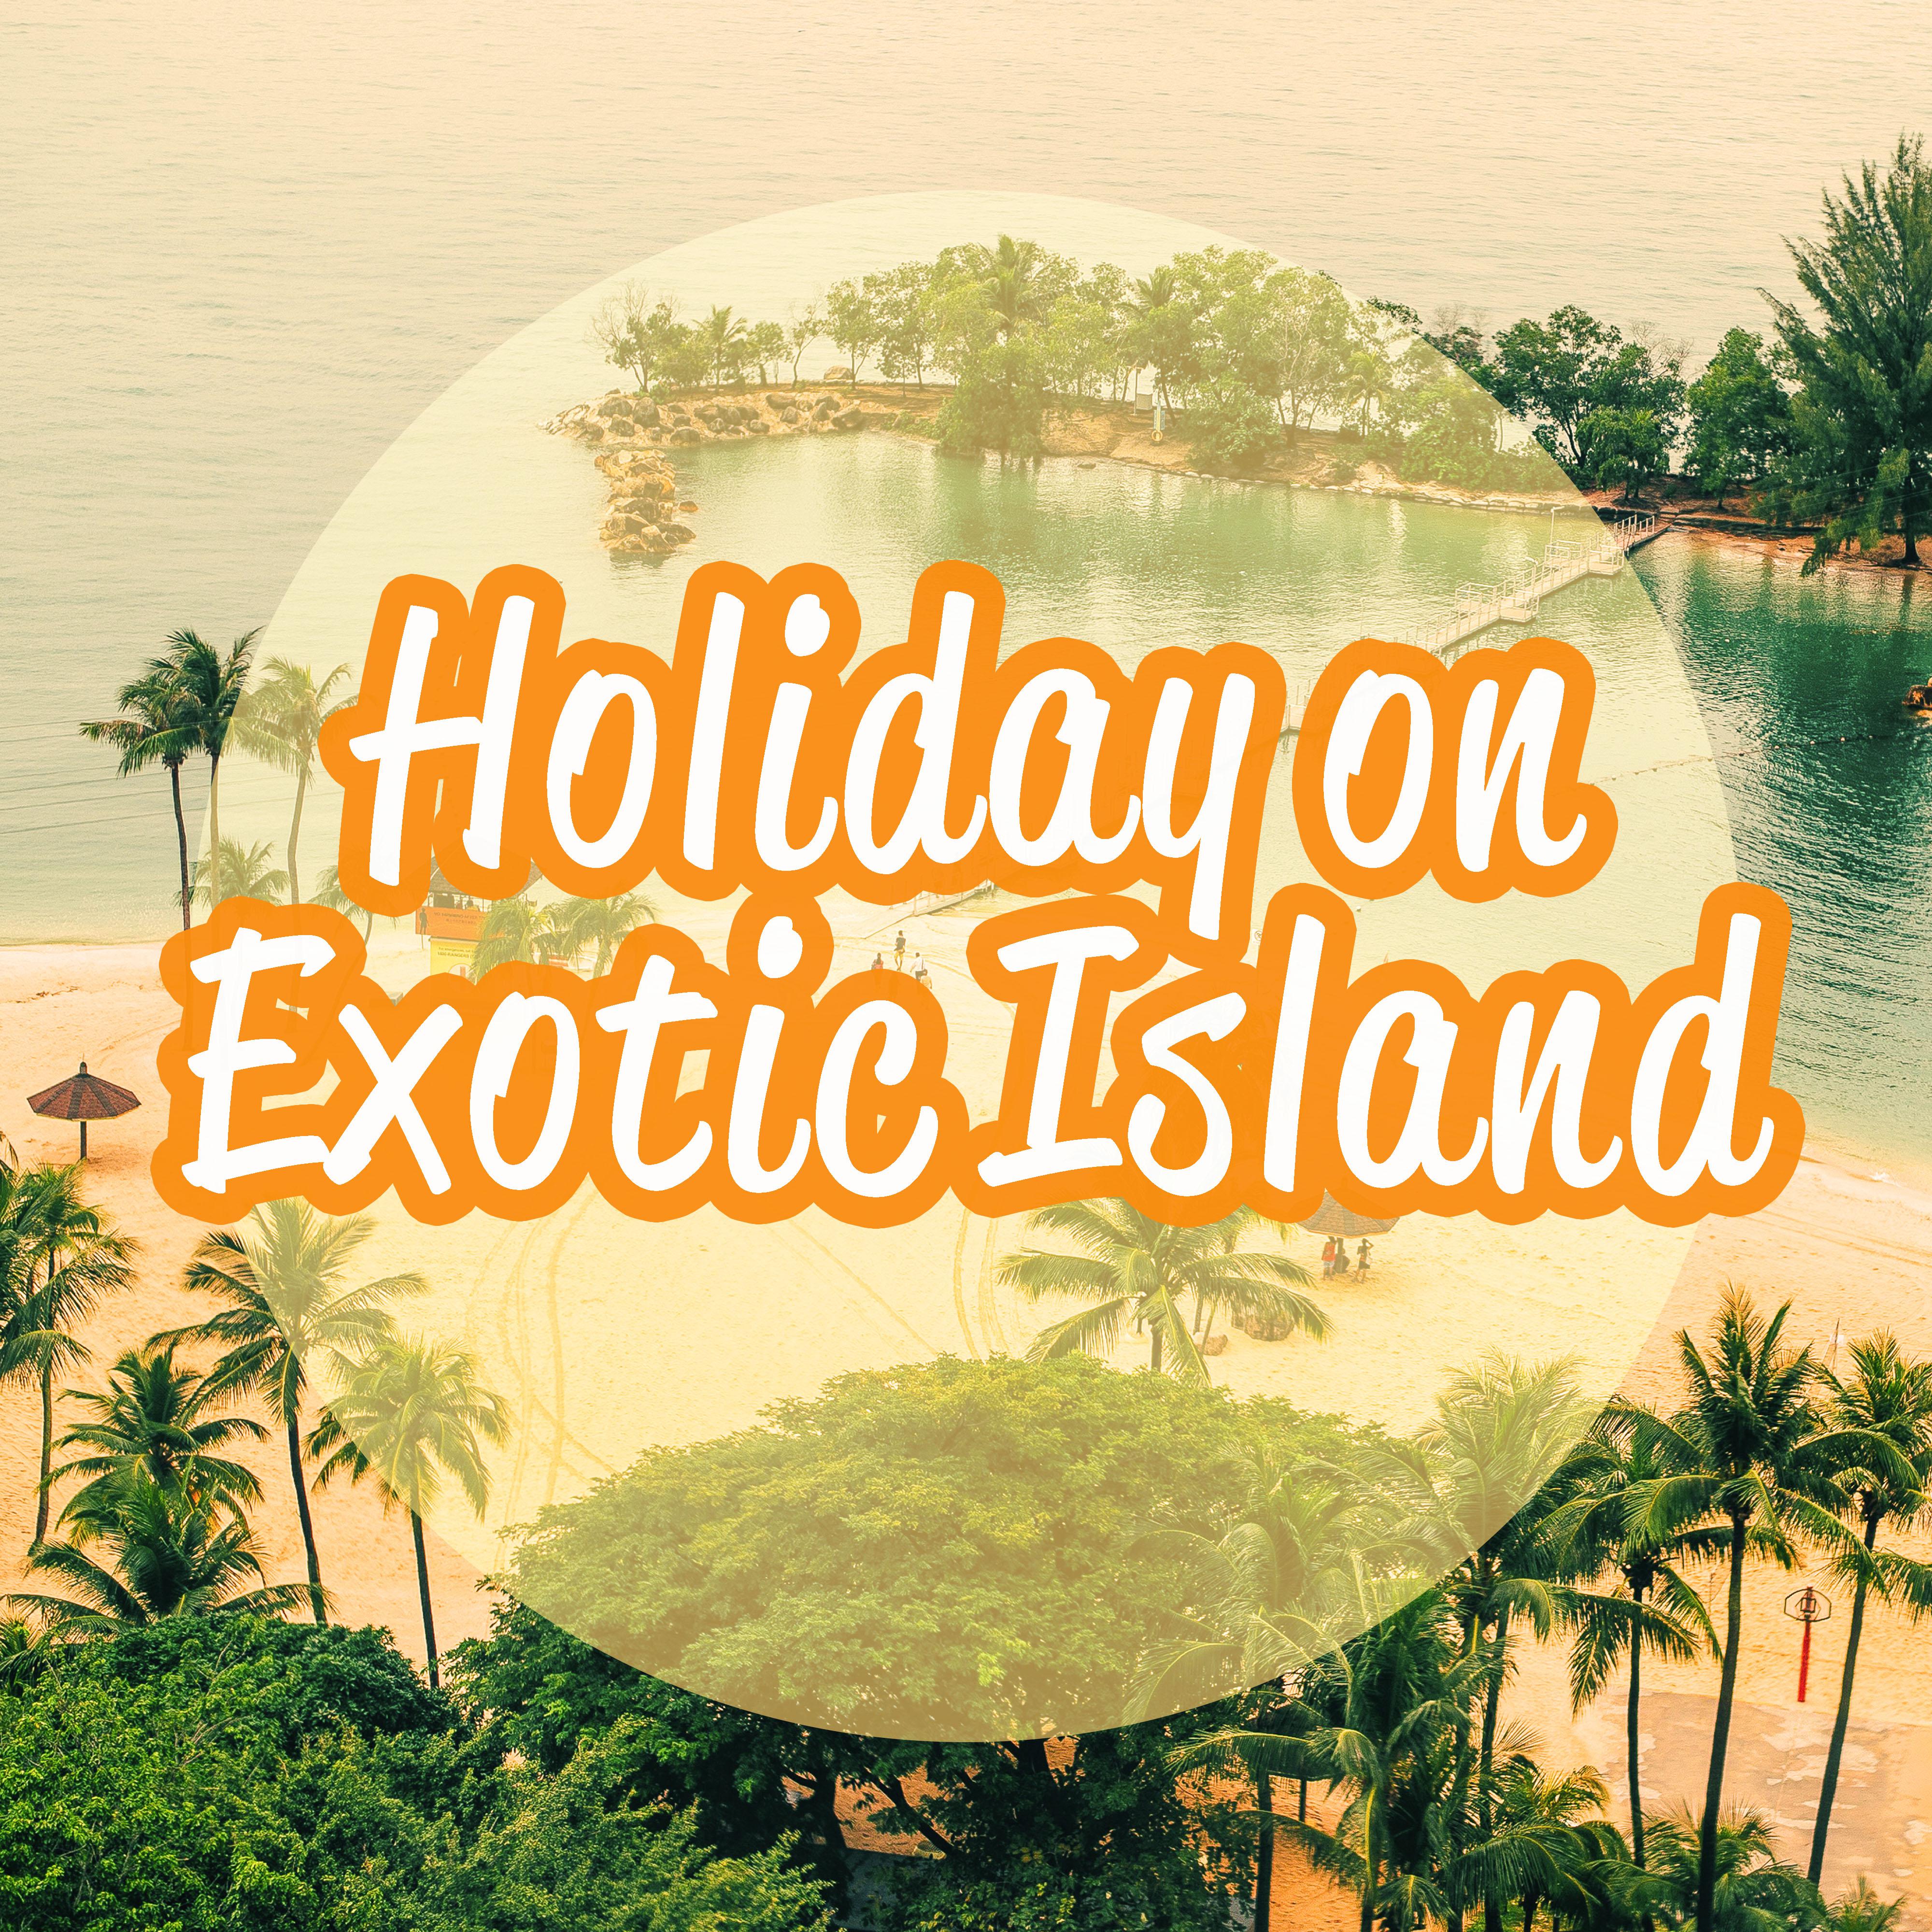 Holiday on Exotic Island – Sunshine Beats, Summertime, Beach Chill Out, Sand, Sea, Deep Sun, Beach Party, Relax